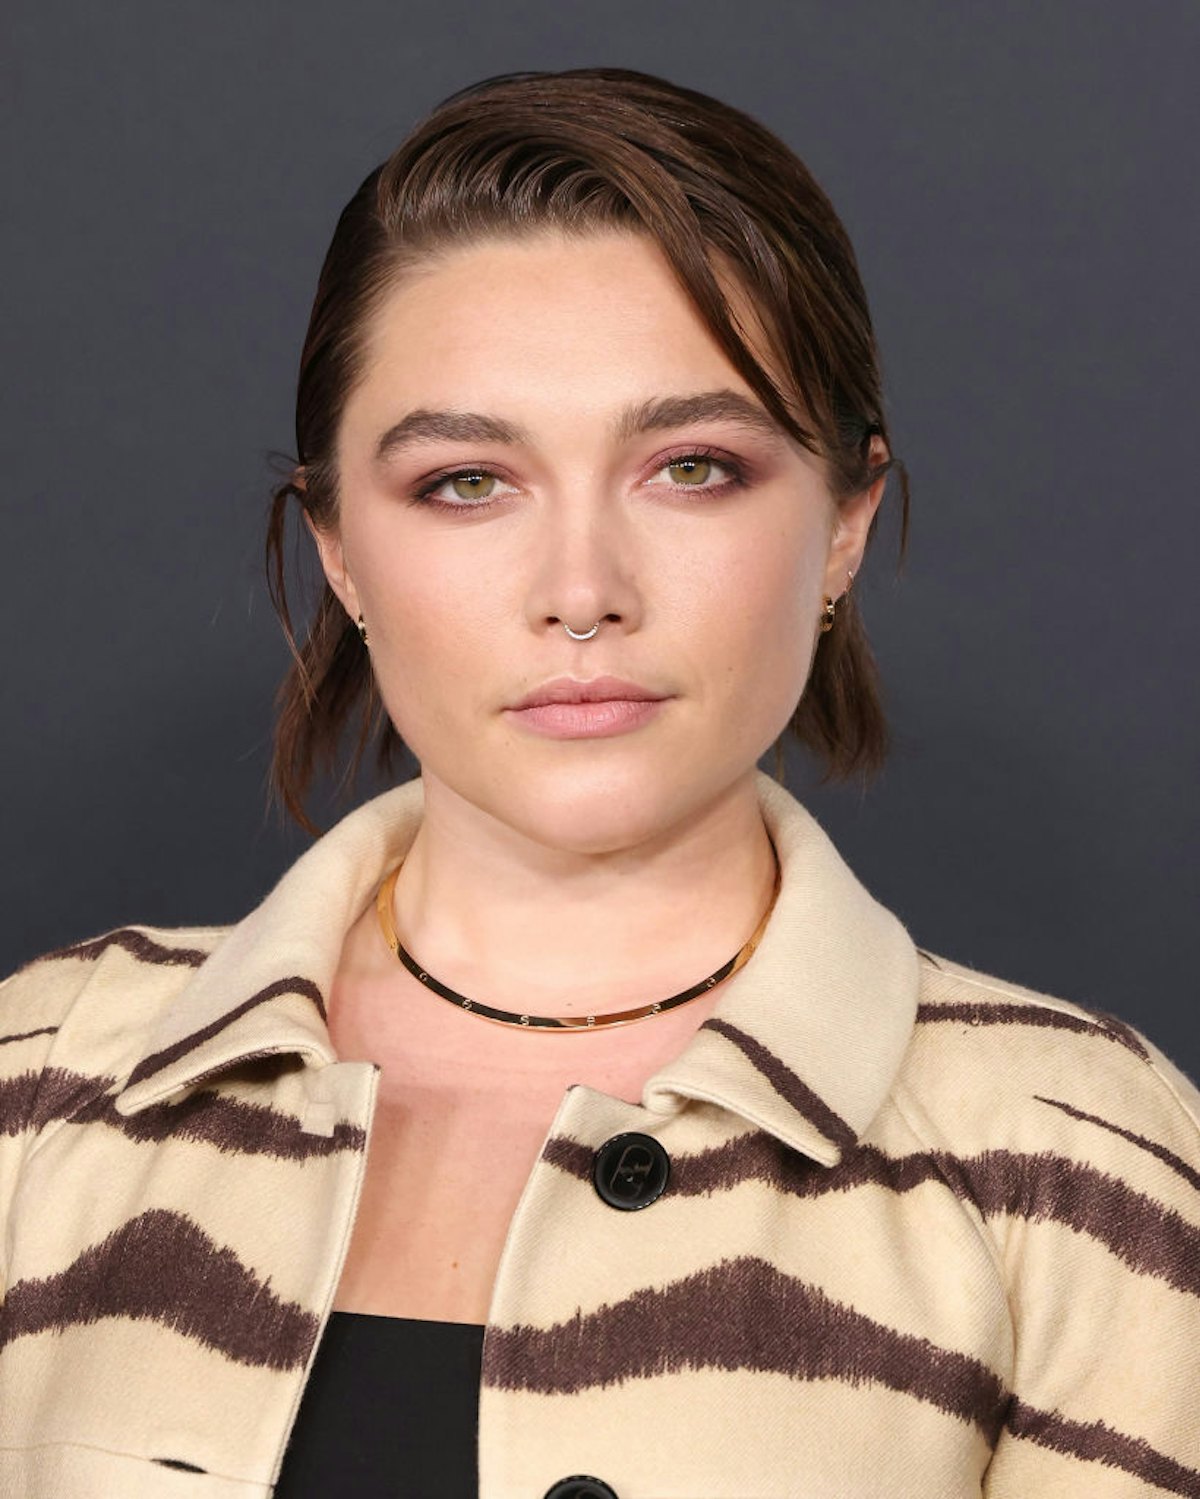 Florence Pugh debuted a dark brunette hair color and a shaggy "mixie" haircut in 2022.